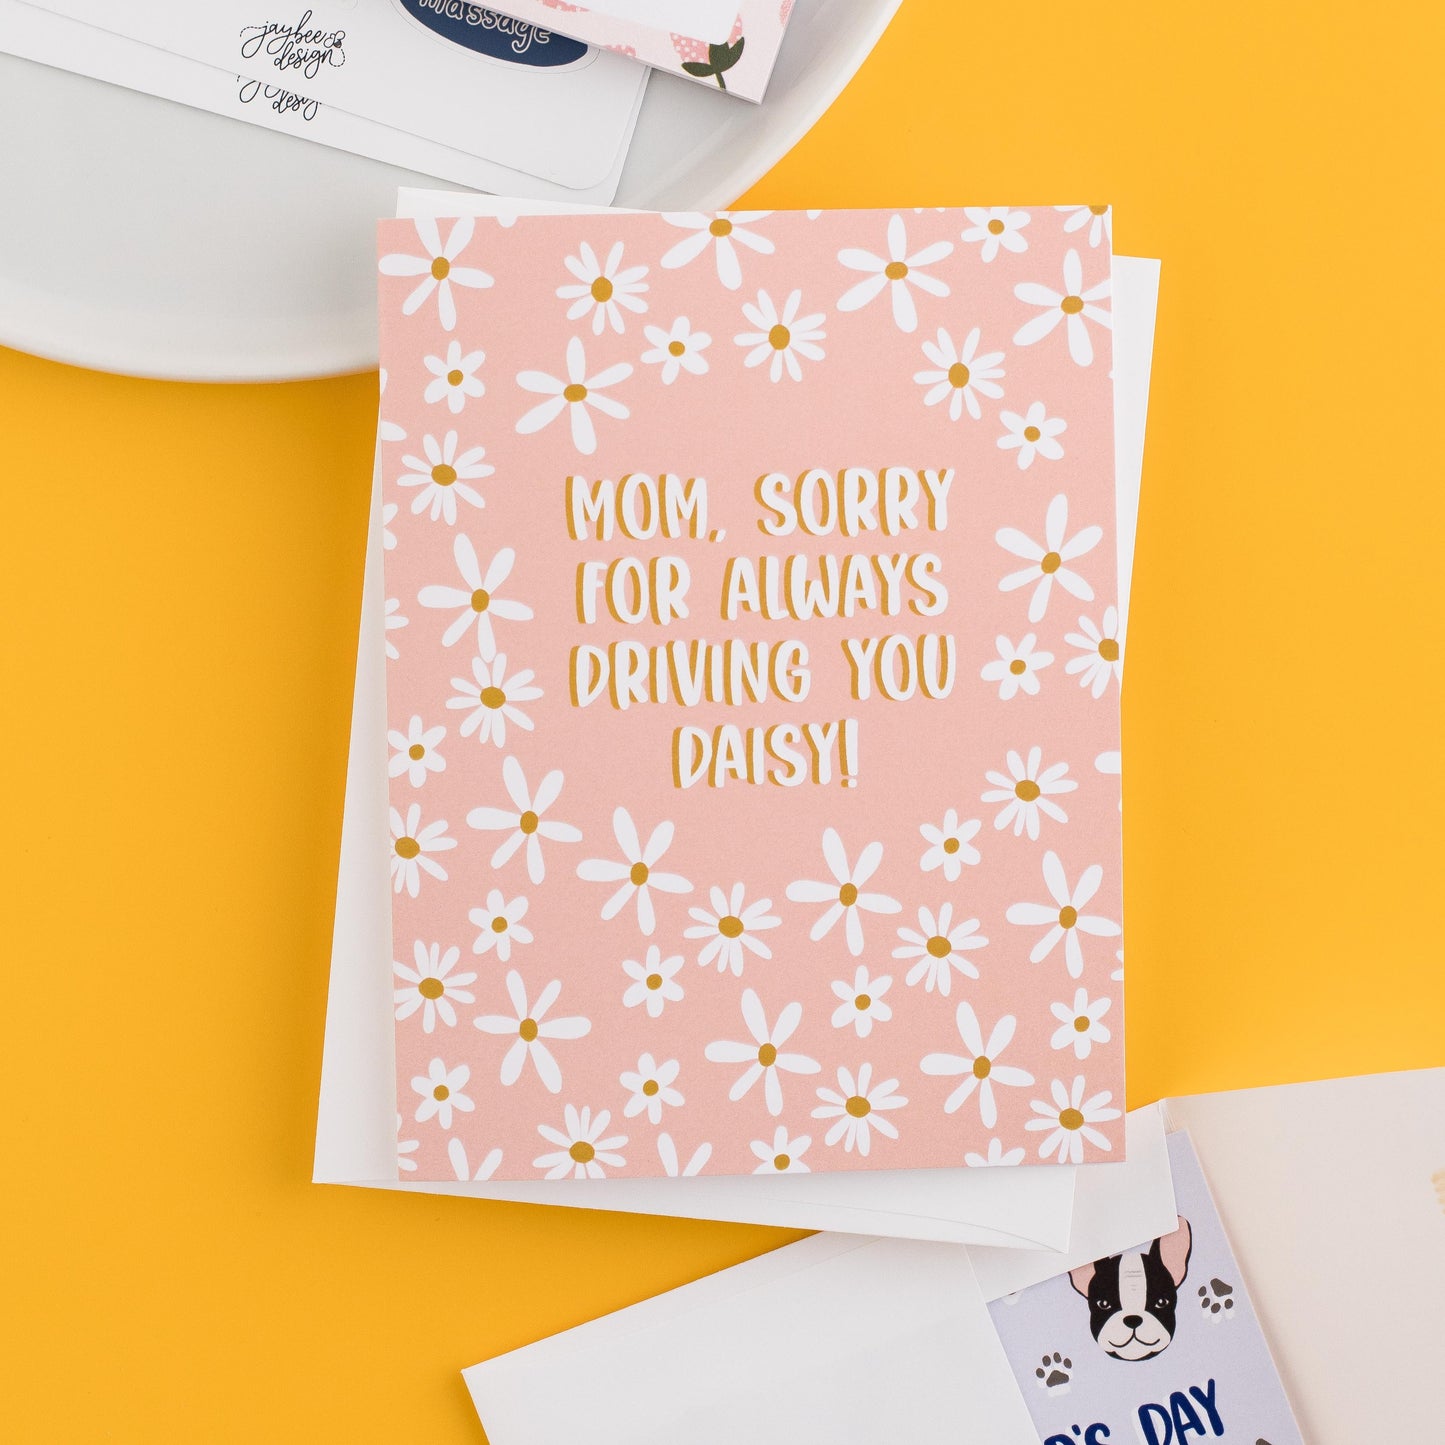 Mom, Sorry For Always Driving You Daisy! - Greeting Card